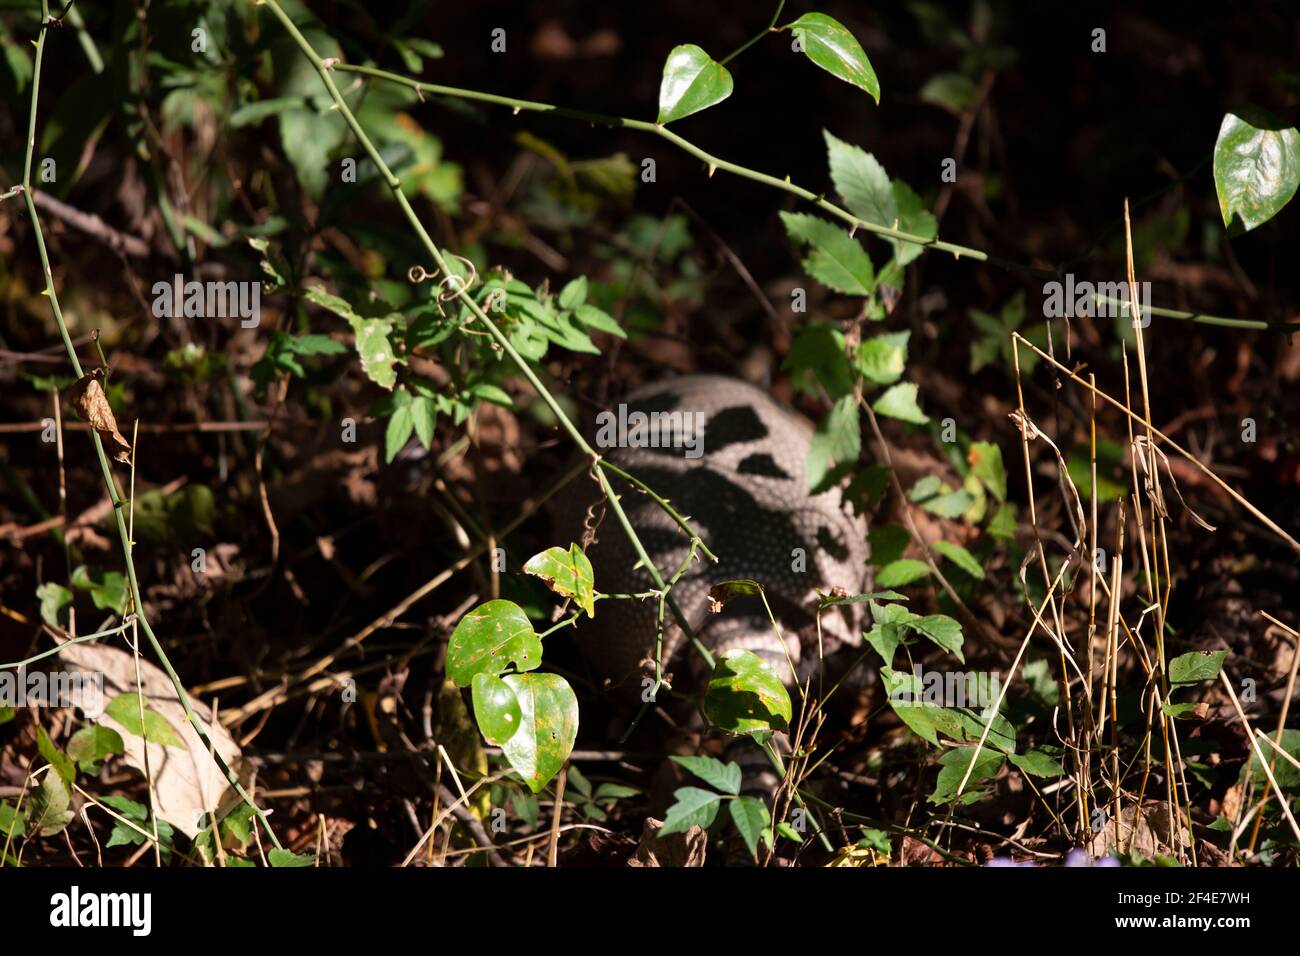 Blurry nine-banded armadillo (Dasypus novemcinctus) foraging for insects in a yard behind thorny vines Stock Photo